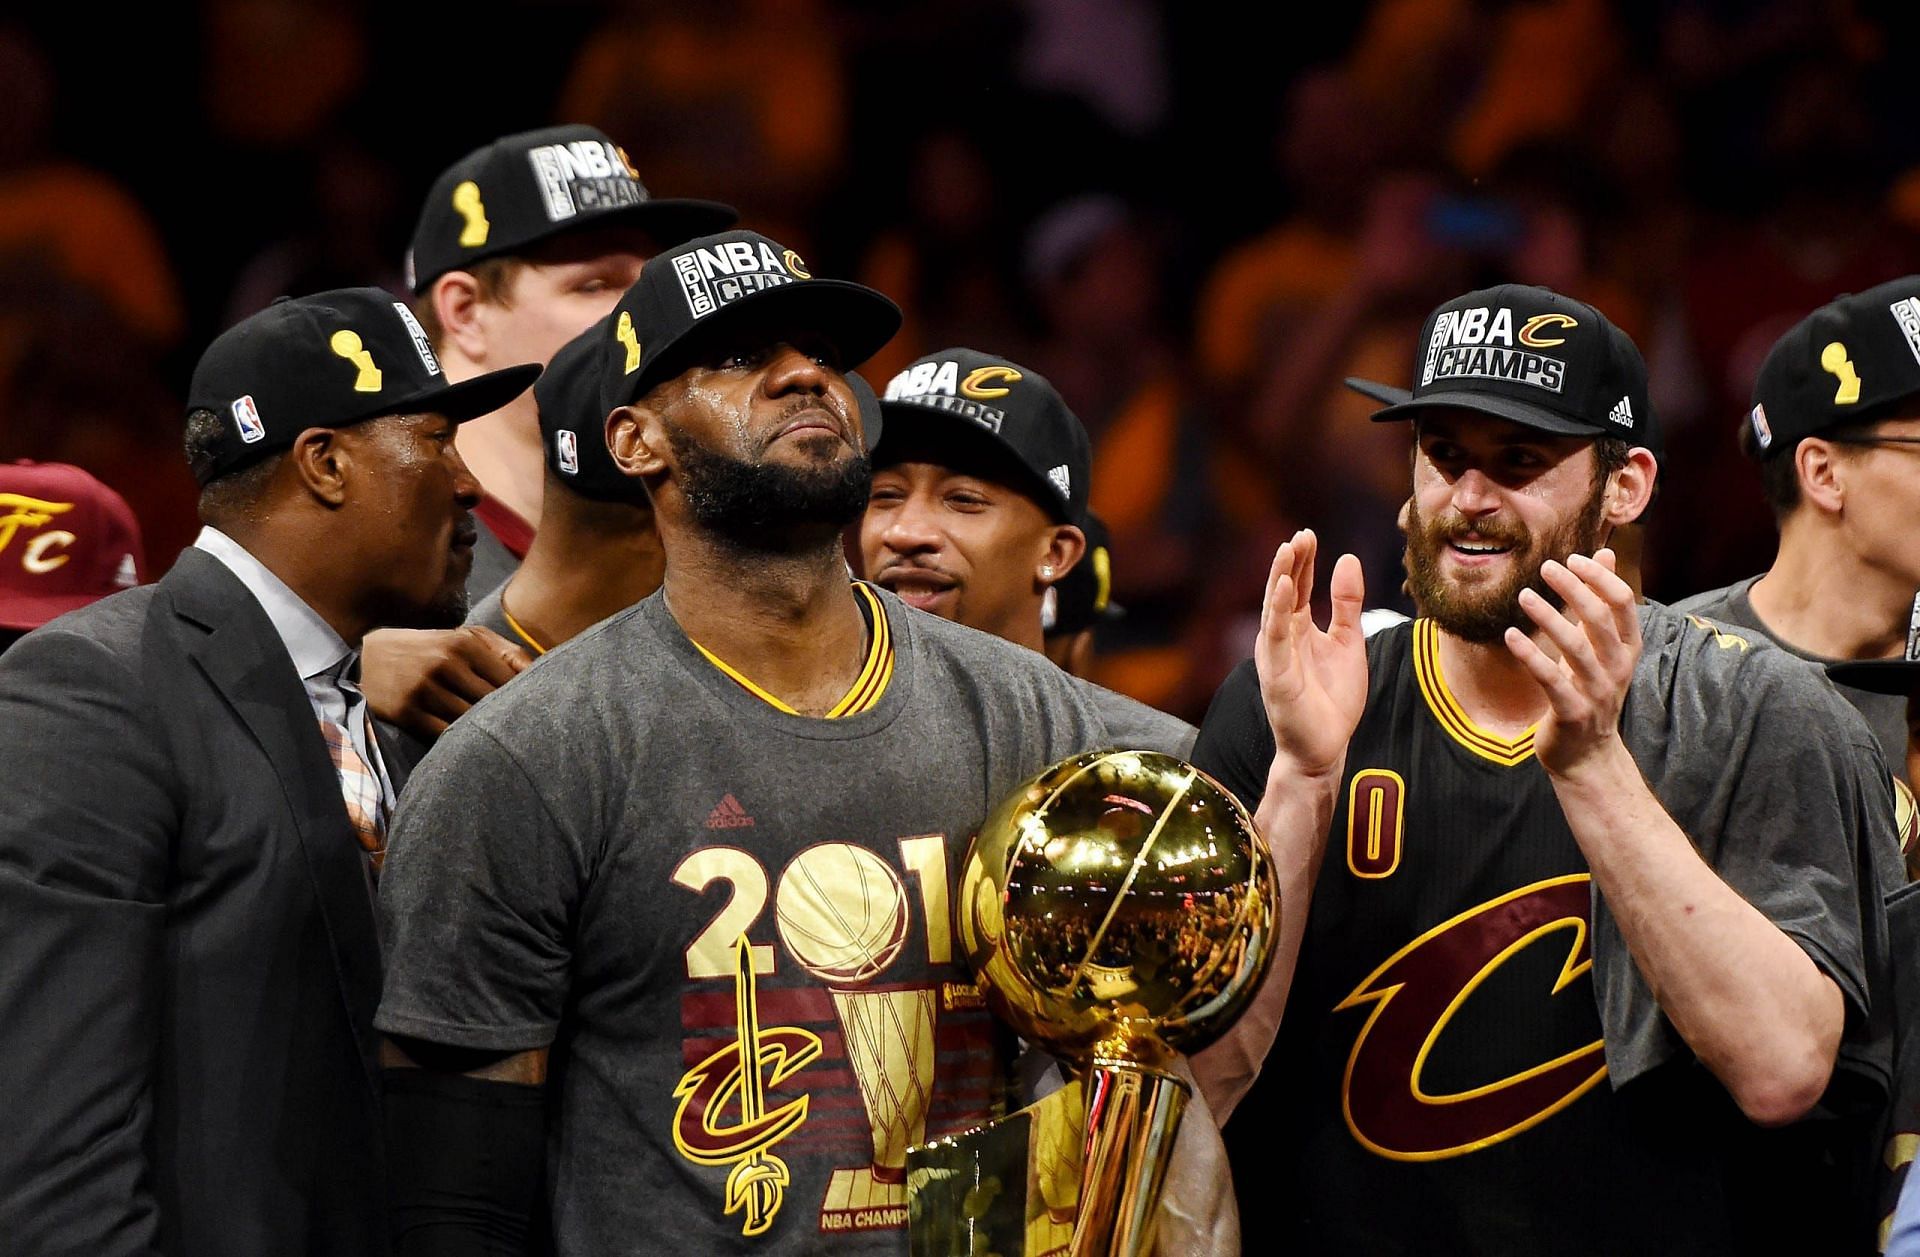 LeBron James kept his promise of giving Cleveland an NBA championship by leading the Cavs past the historically great Golden State Warriors in the 2016 NBA Finals. [Photo: USA Today]